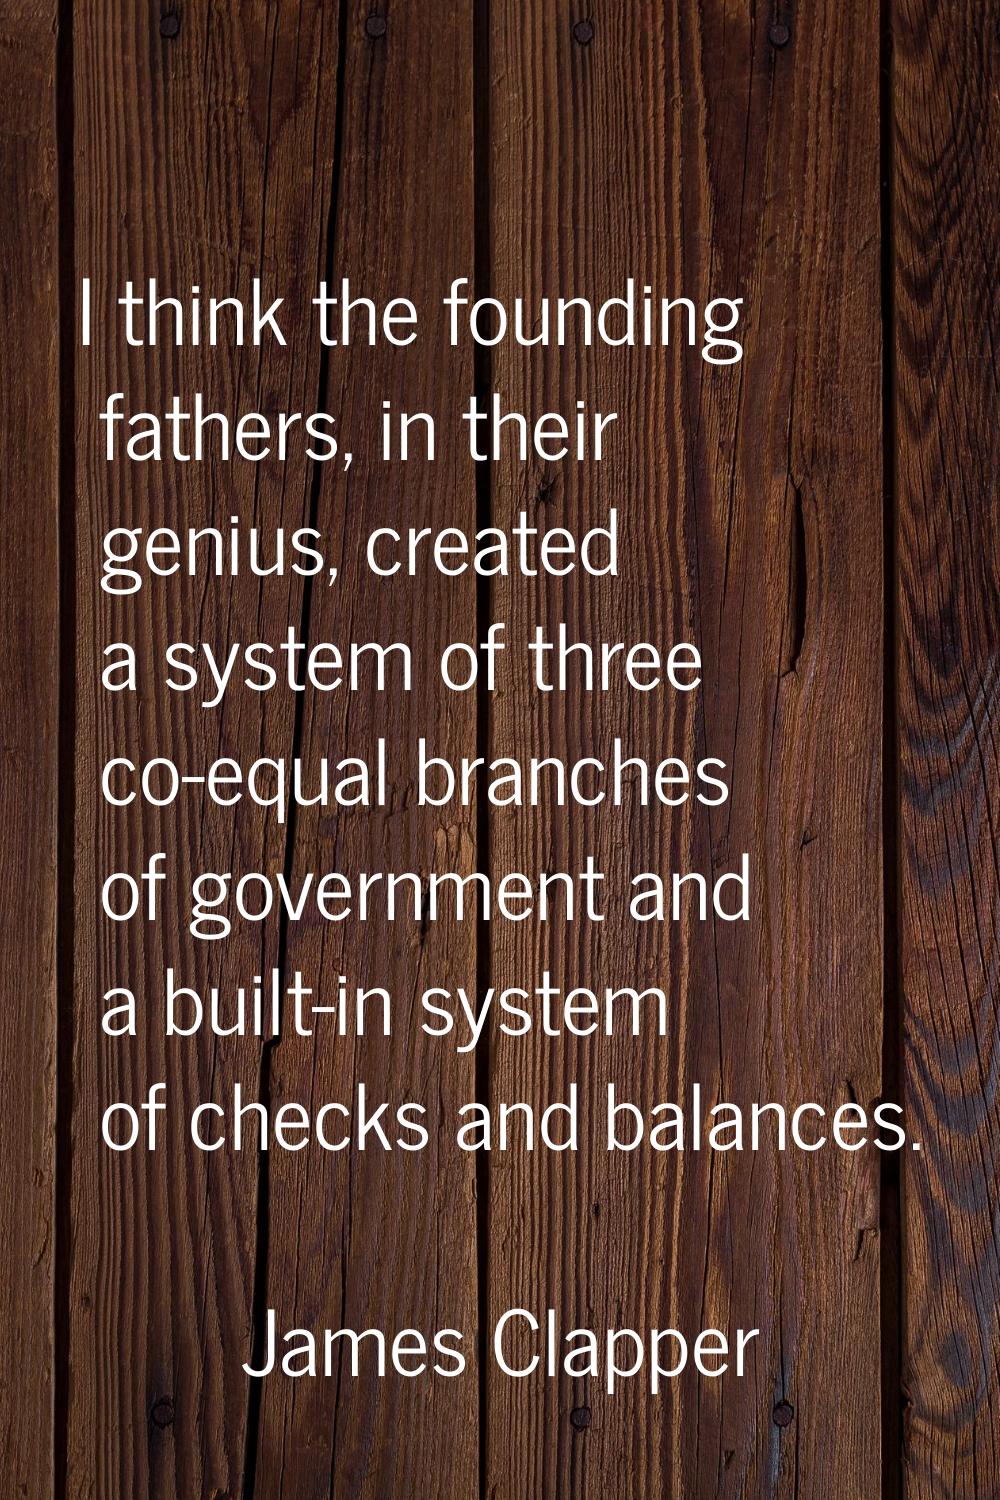 I think the founding fathers, in their genius, created a system of three co-equal branches of gover